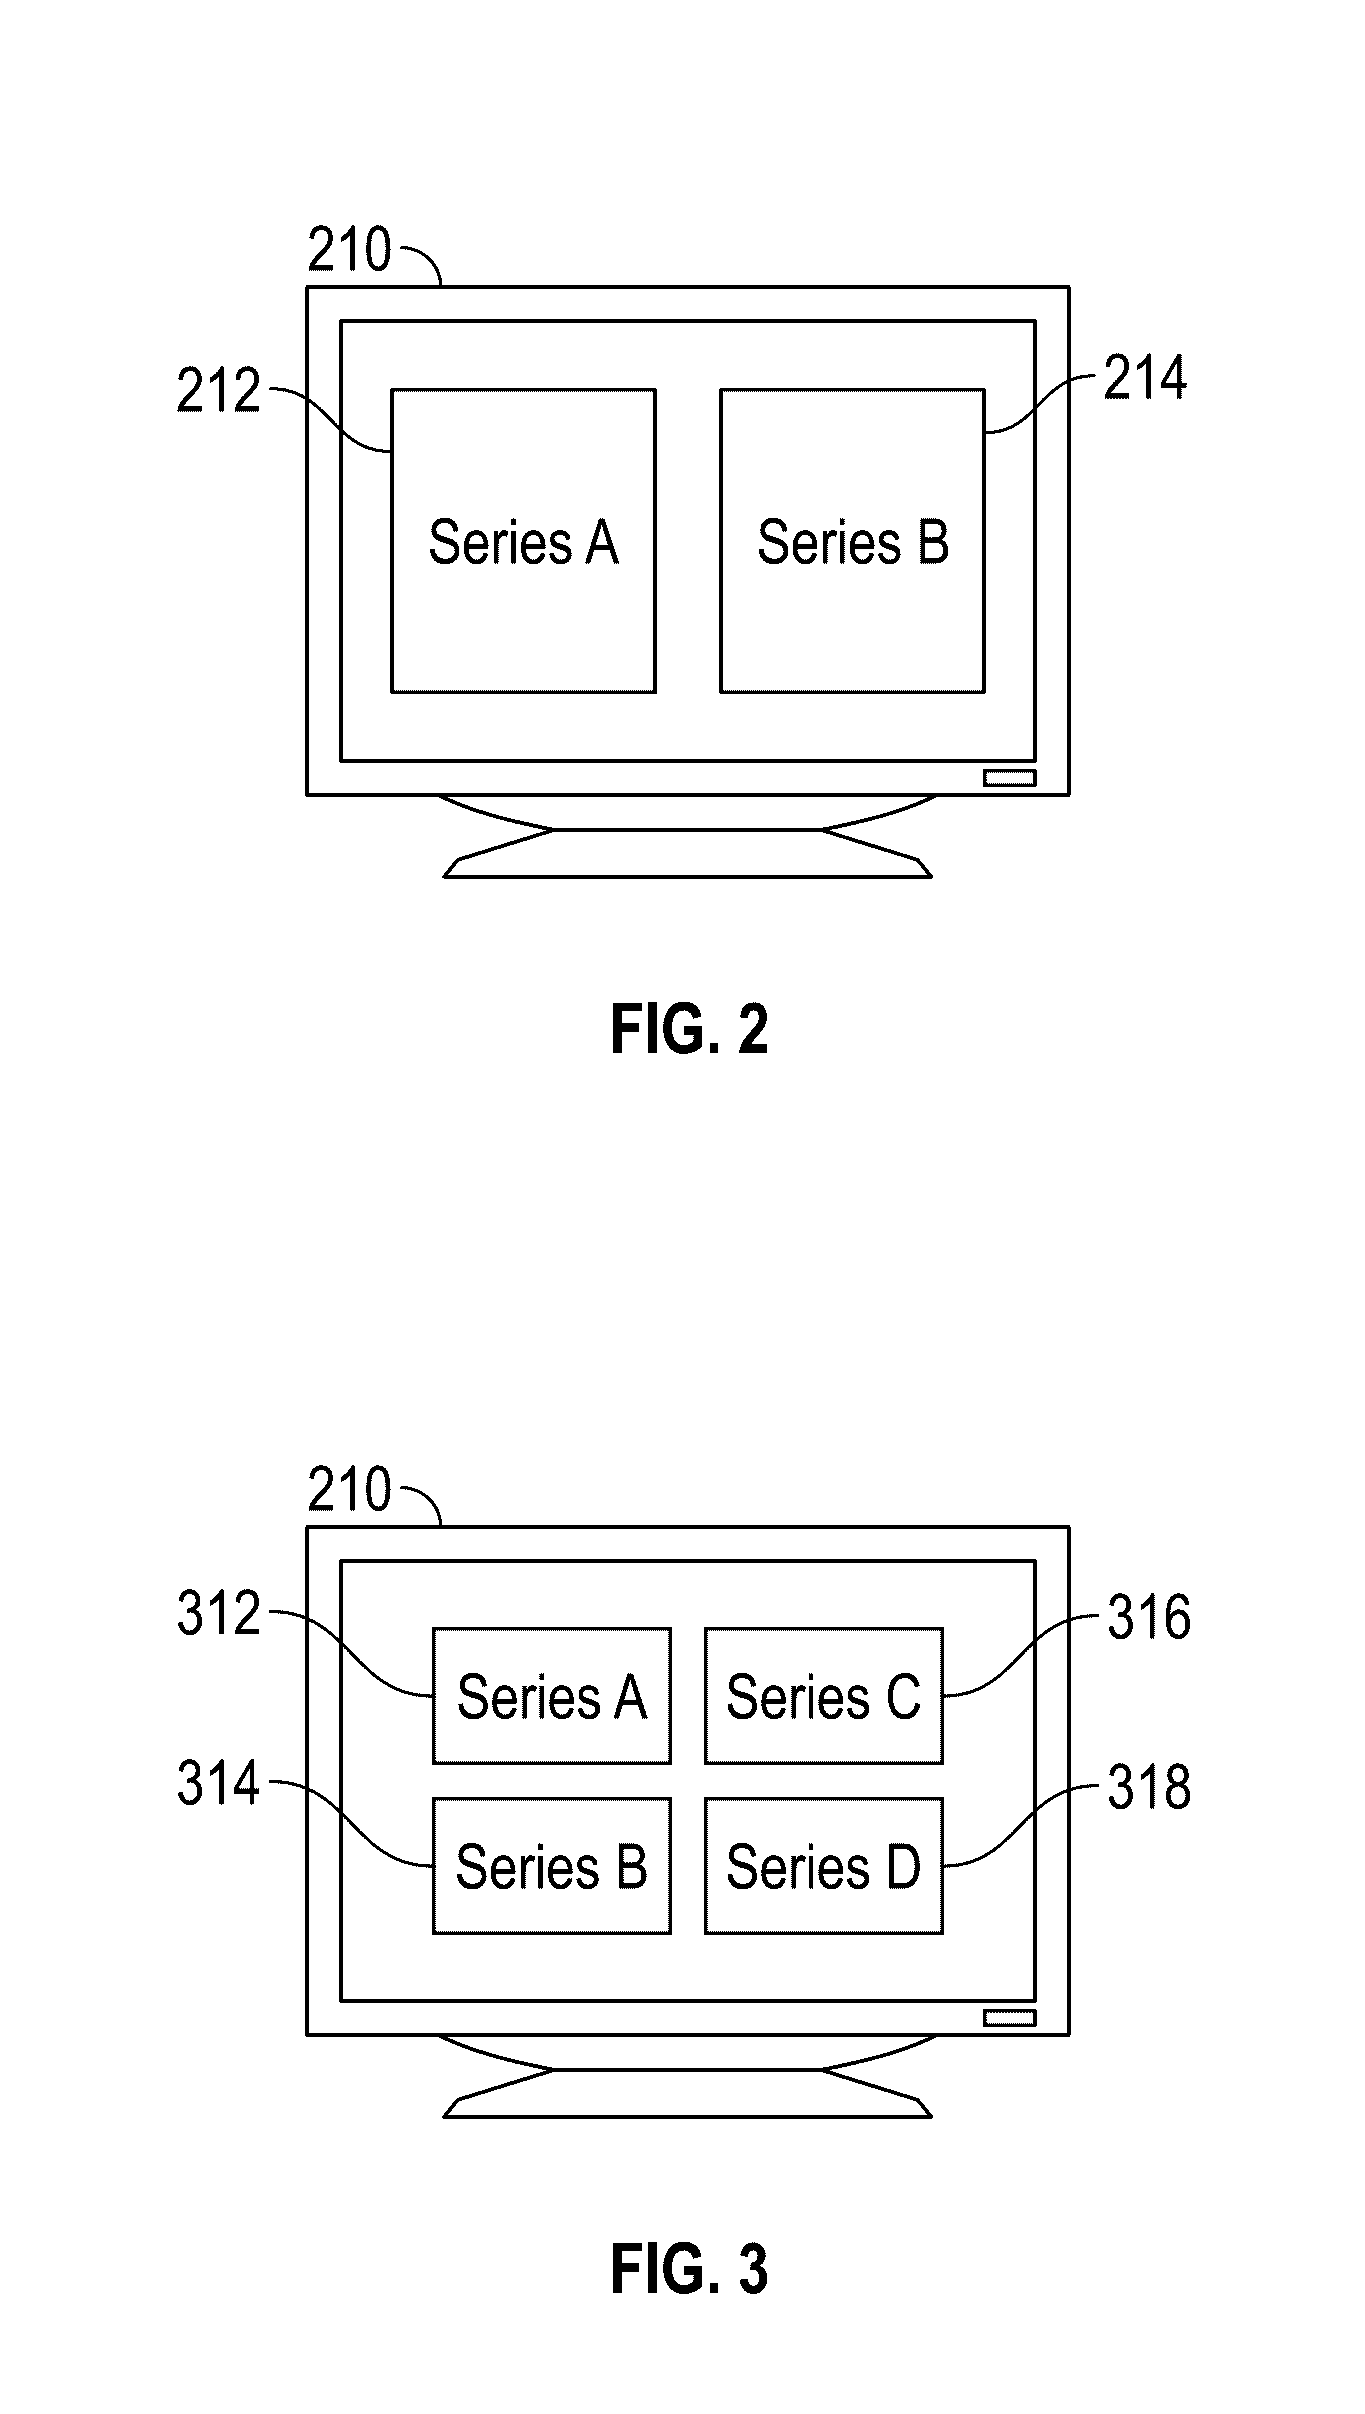 Database systems and interactive user interfaces for dynamic interaction with, and sorting of, digital medical image data